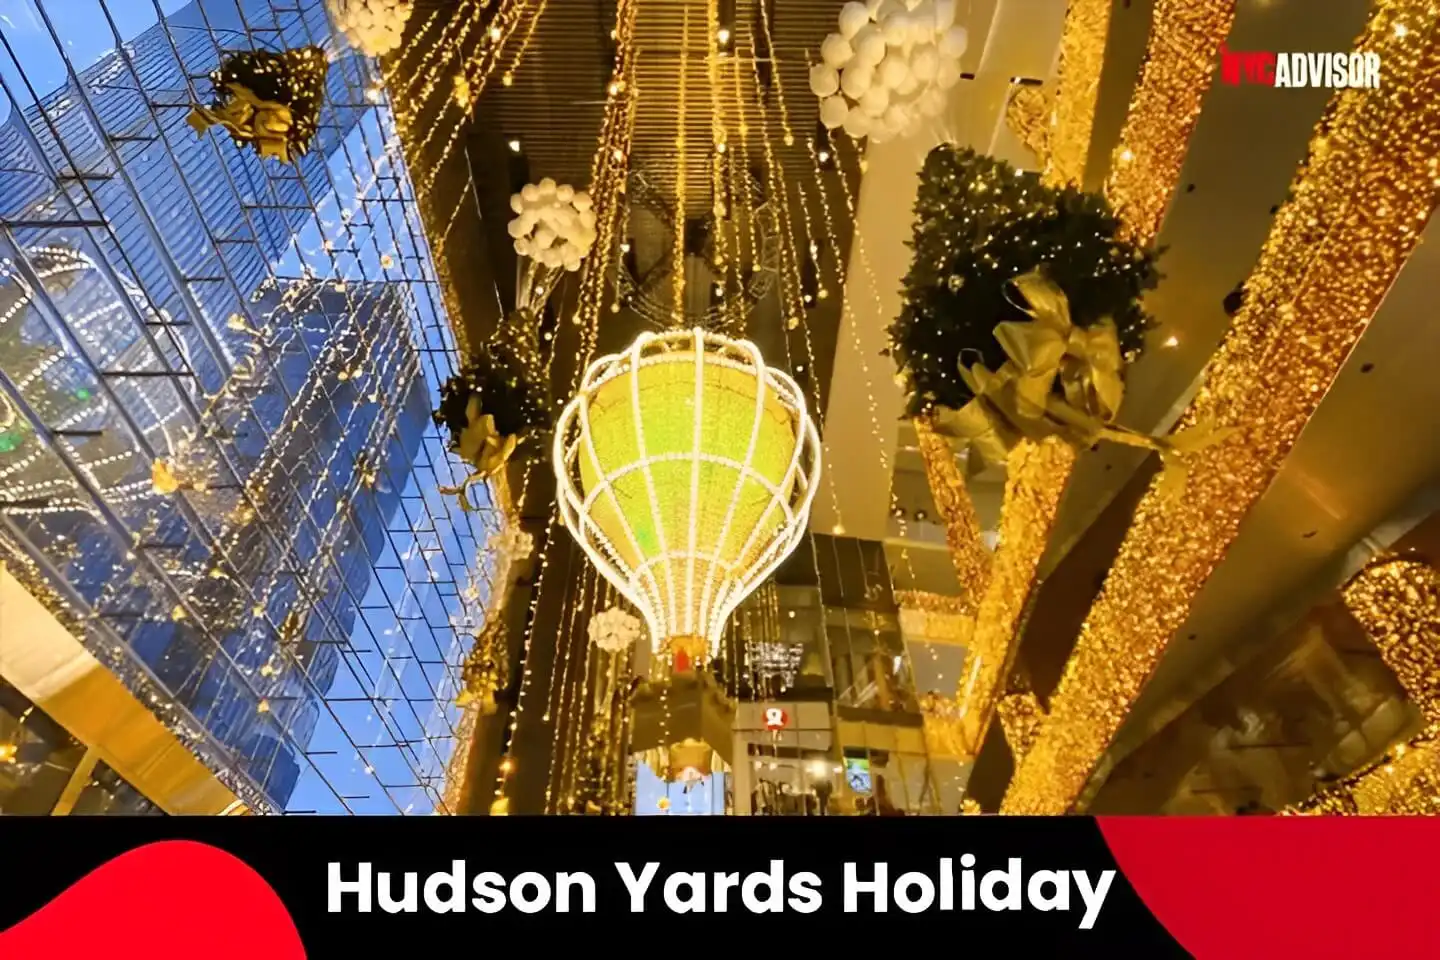 Hudson Yards Holiday Decorations, in NYC